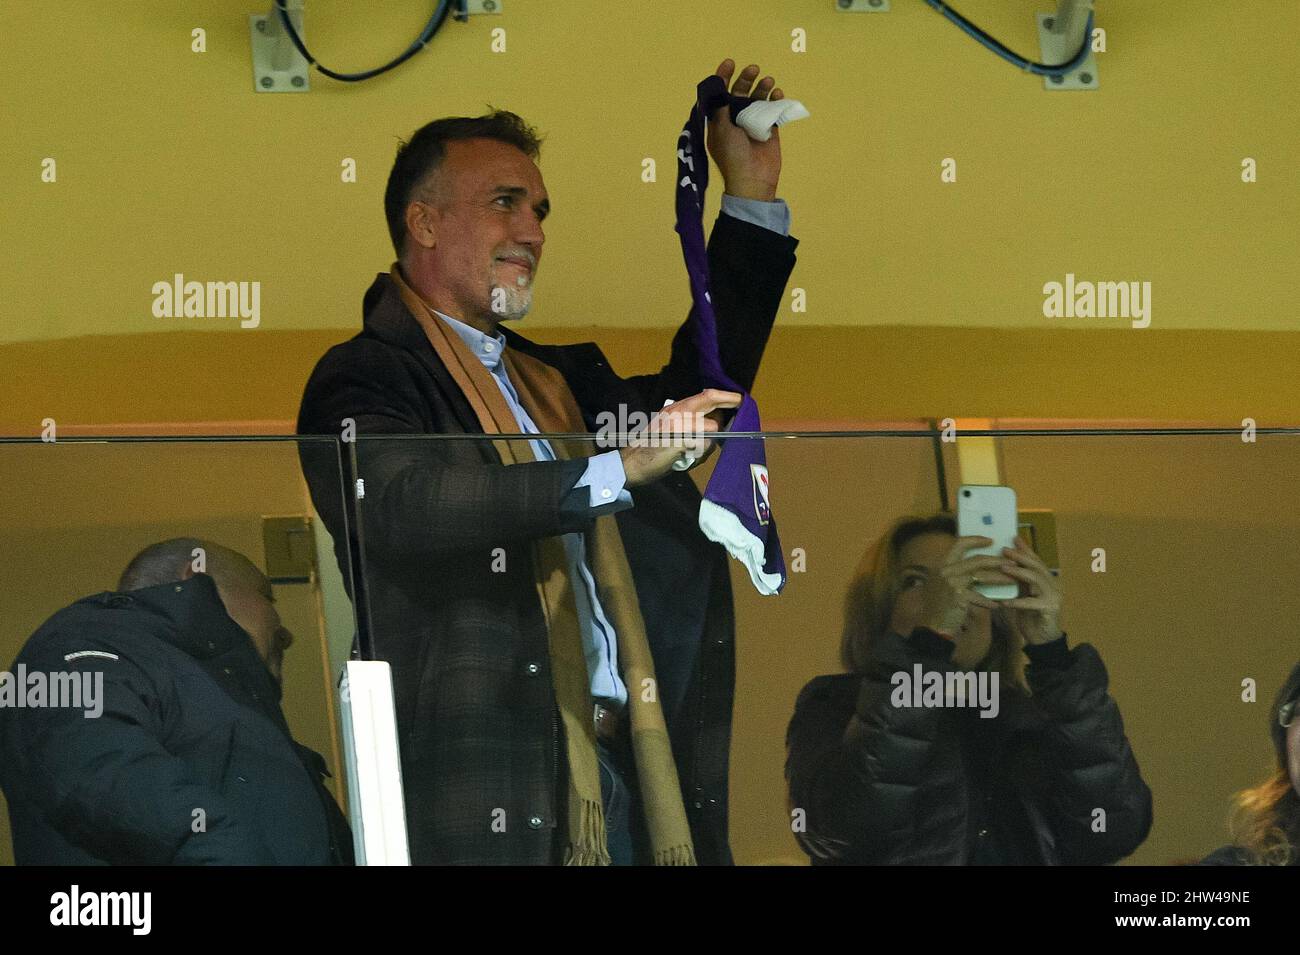 Florence, Italy. 02nd Mar, 2022. Former player of ACF Fiorentina Gabriel Omar Batistuta on the stands during the Coppa Italia Semi Final 1st Leg match between ACF Fiorentina and FC Juventus at Stadio Artemio Franchi, Florence, Italy on 2 March 2022. Credit: Giuseppe Maffia/Alamy Live News Stock Photo